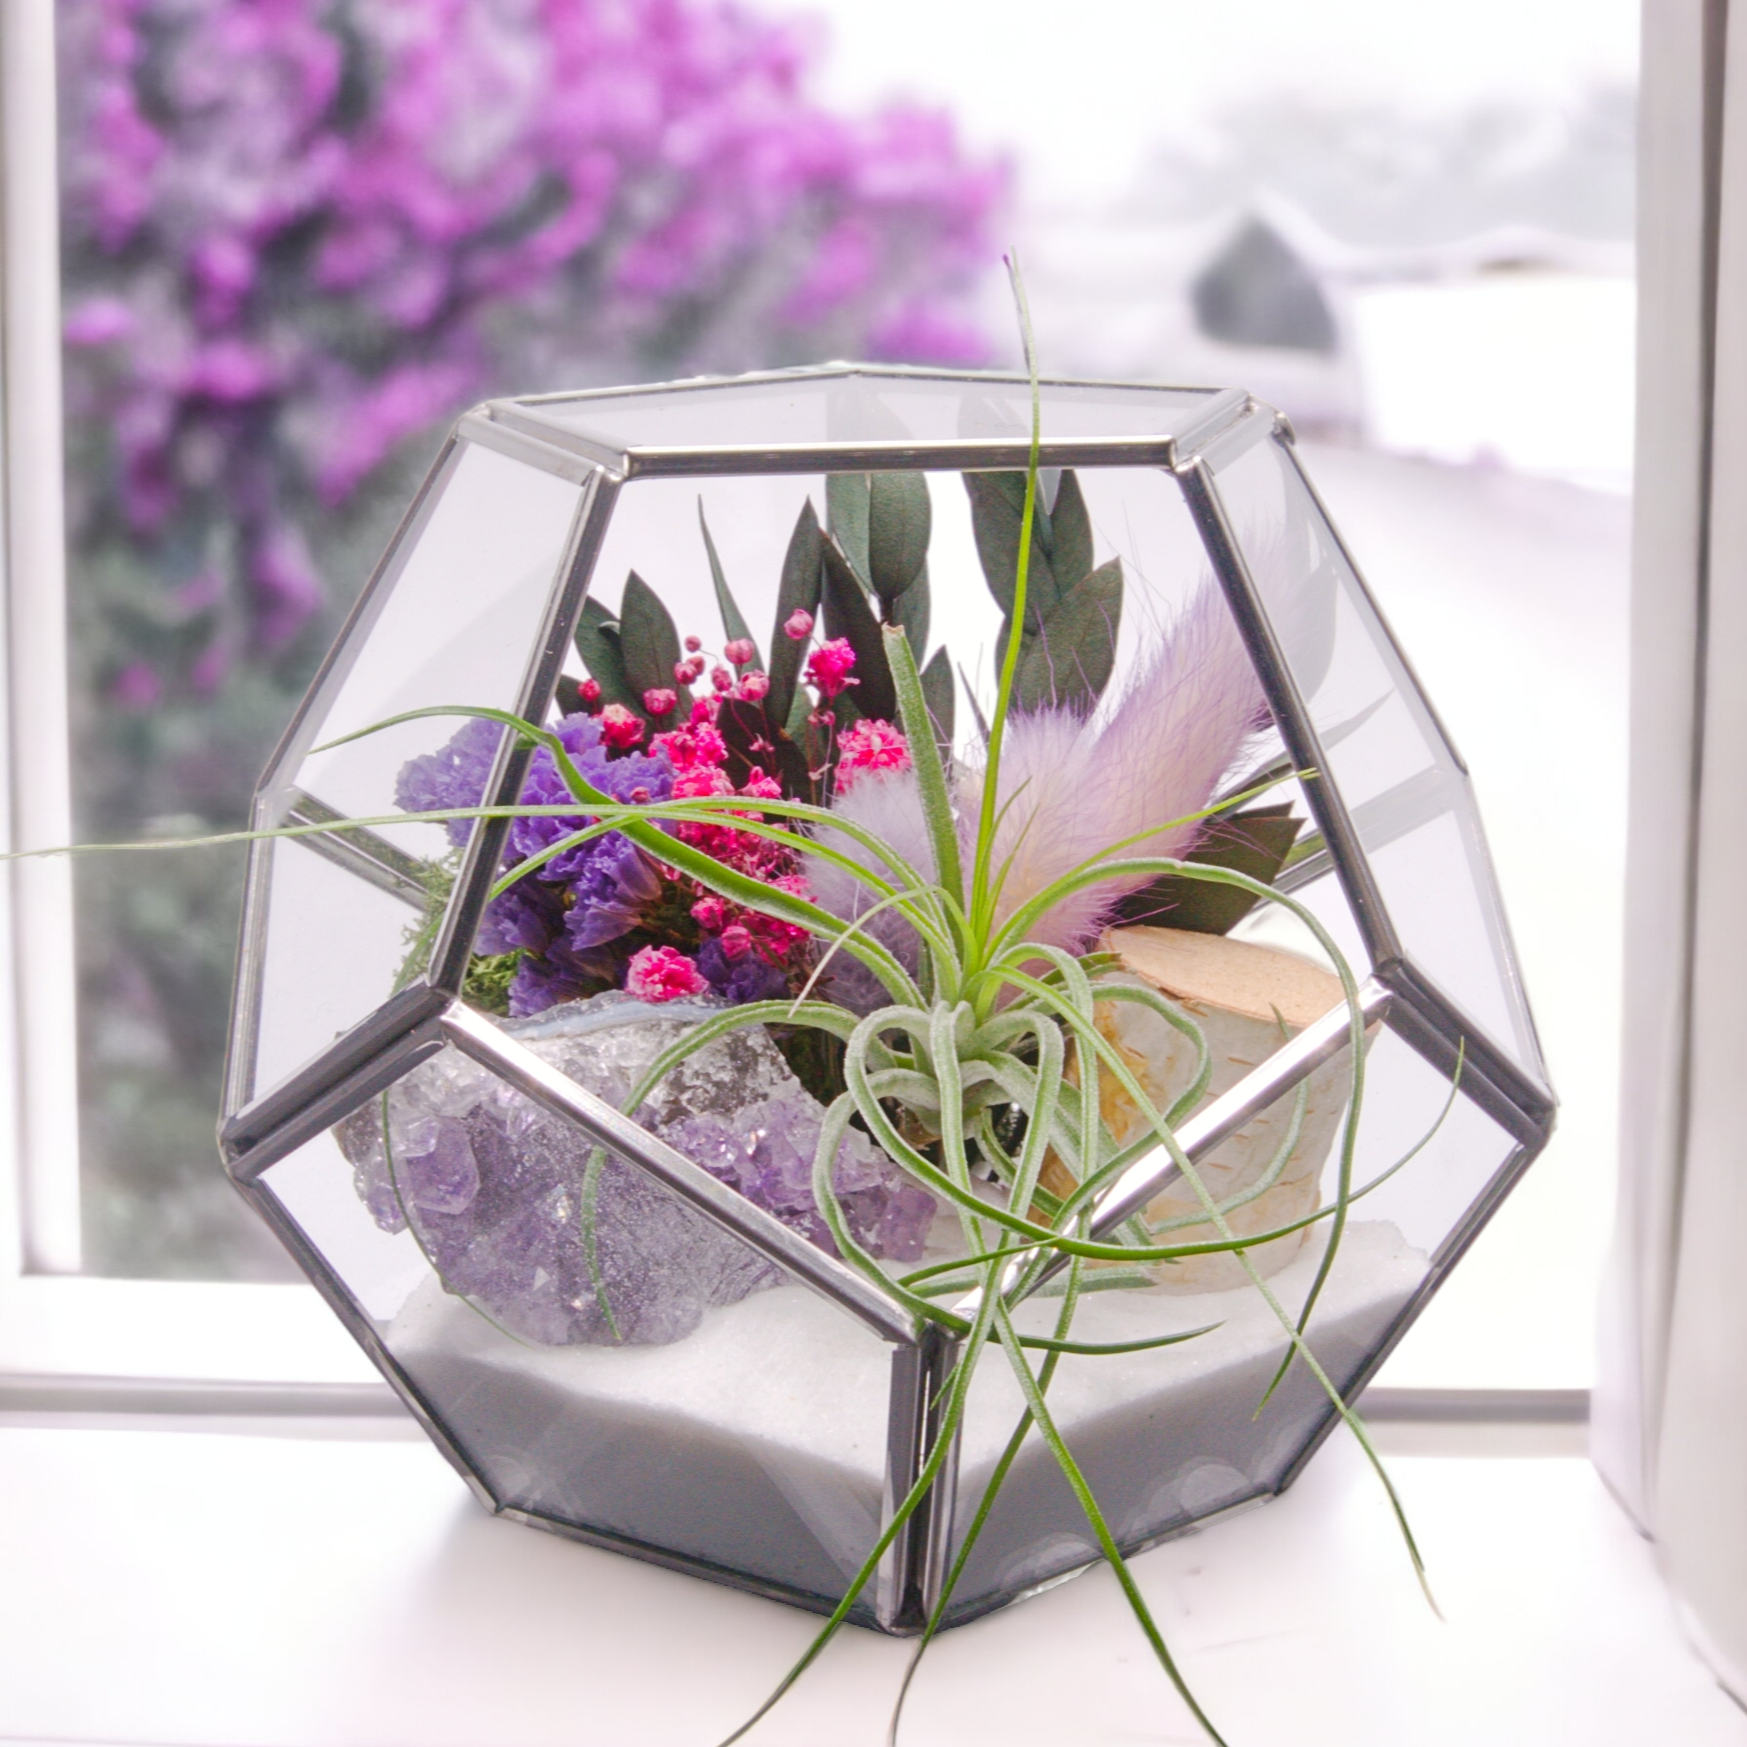 Silver Victorian airplant terrarium bowl with dried flowers, wood, moss, amethyst crystal